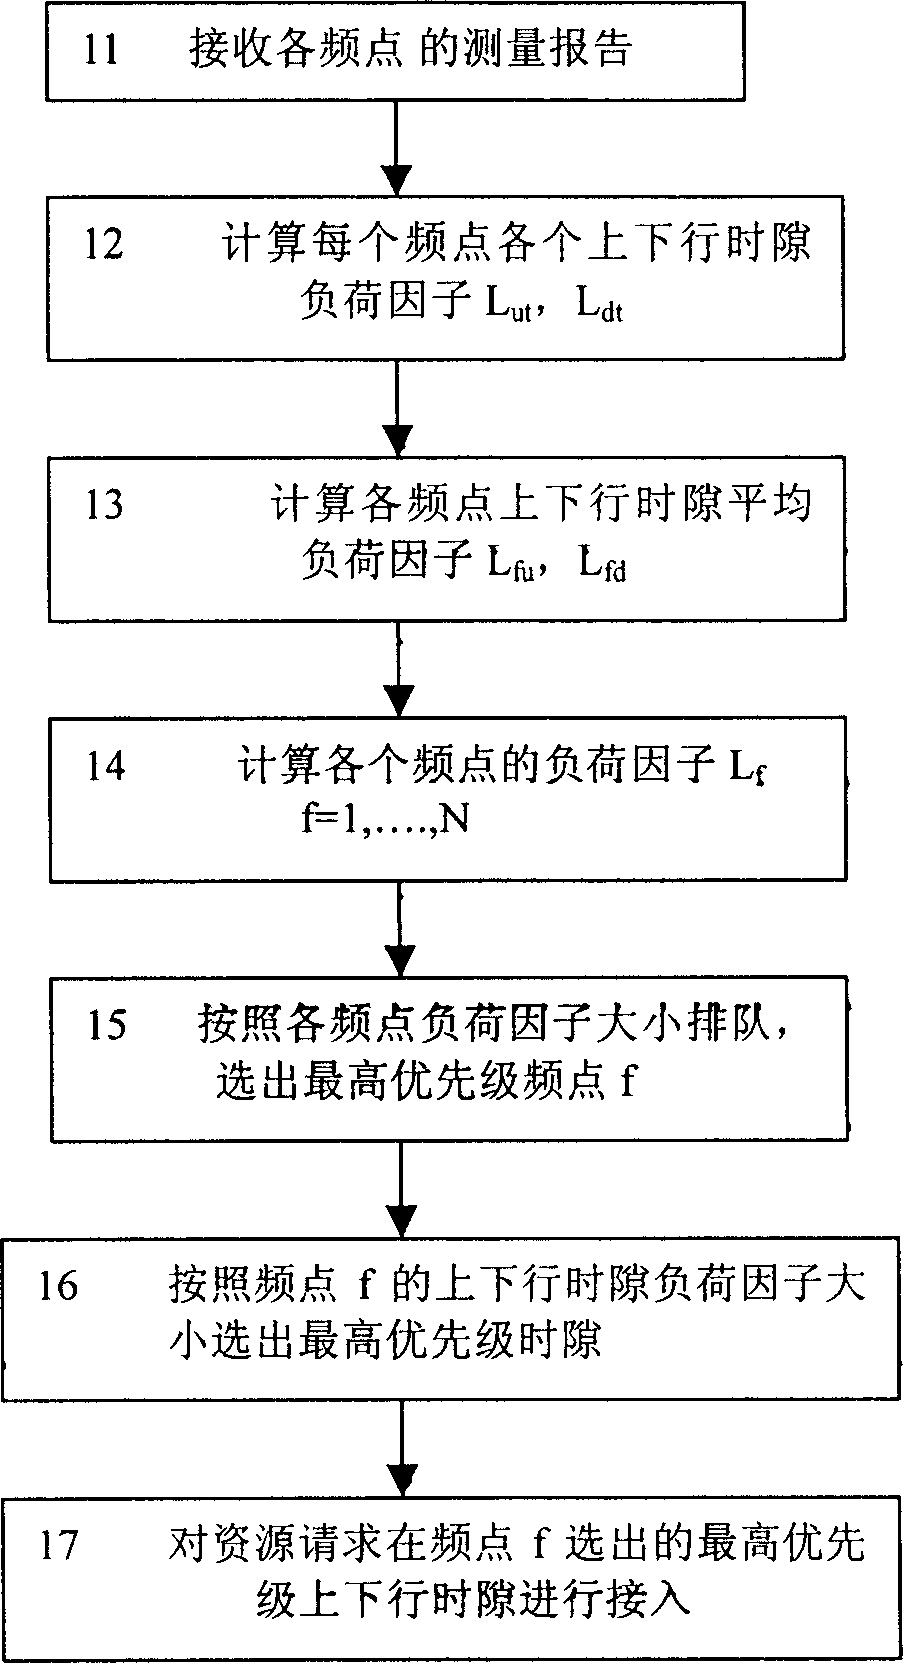 Access priority oriented queuing method under multi-frequency condition of TDD system